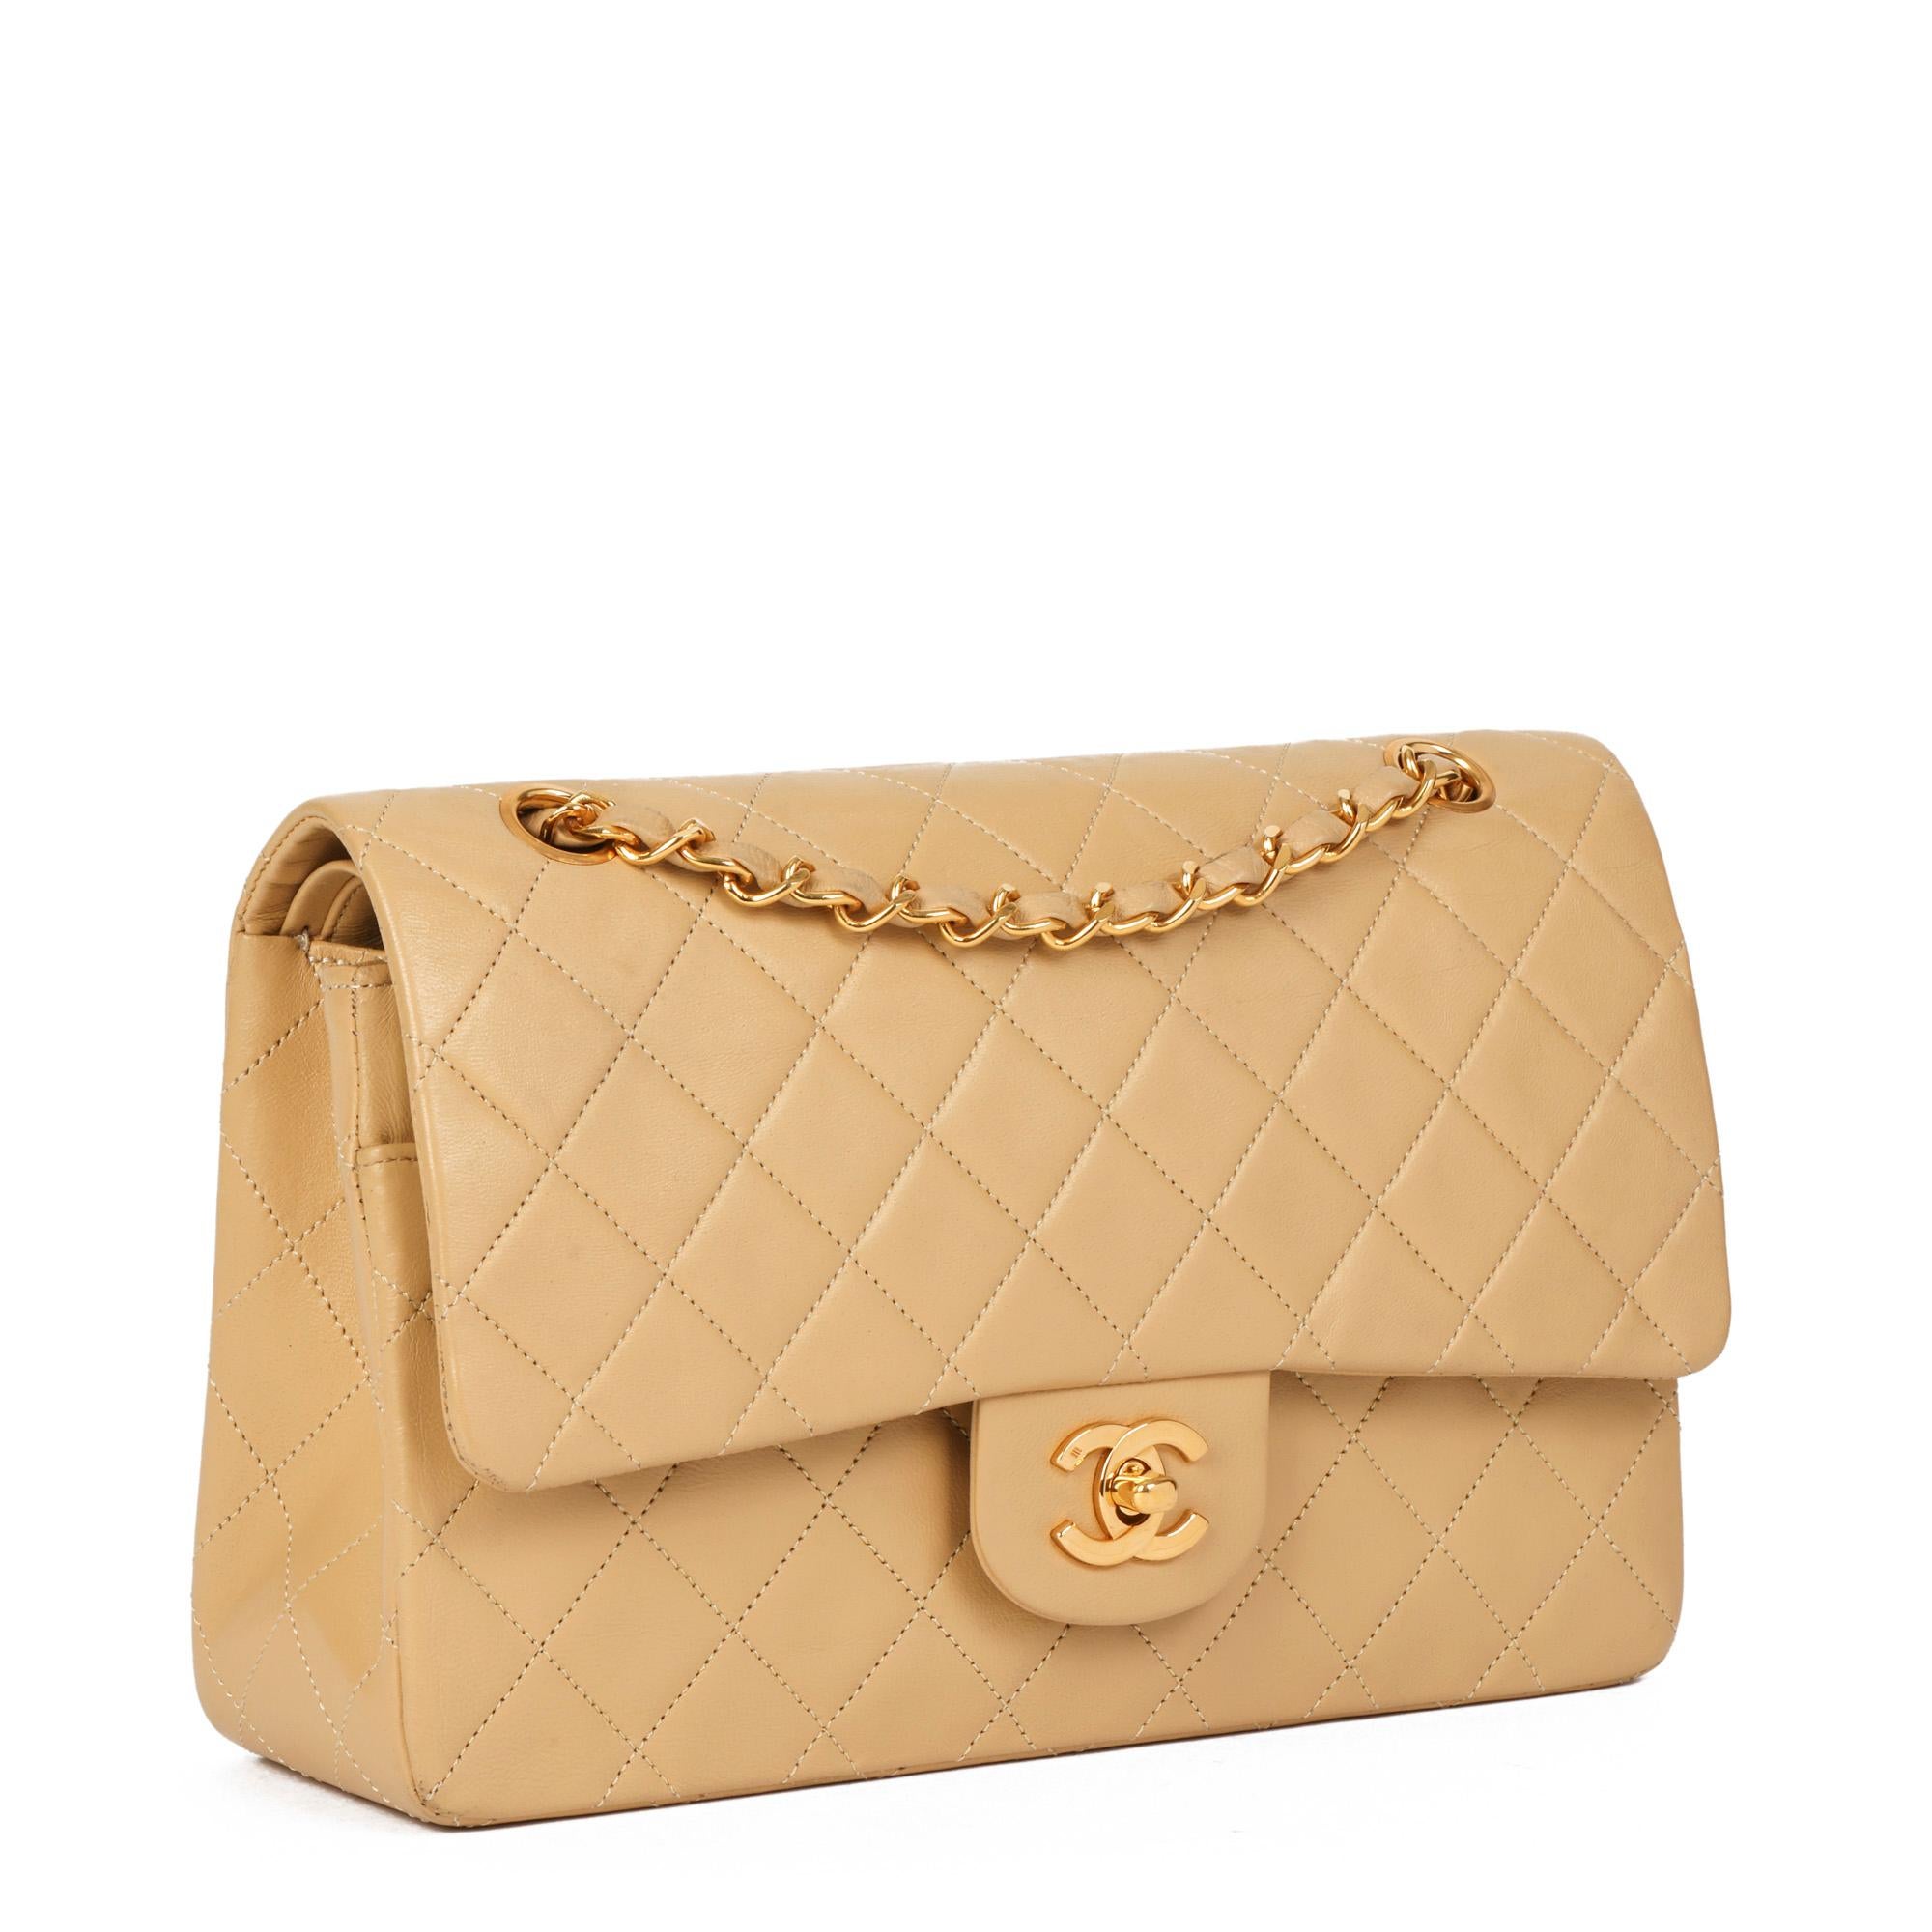 CHANEL
Beige Quilted Lambskin Vintage Medium Classic Double Flap Bag

Xupes Reference: HB4375
Serial Number: 0702216
Age (Circa): 1989
Accompanied By: Chanel Dust Bag, Authenticity Card
Authenticity Details: Authenticity Card, Serial Sticker (Made